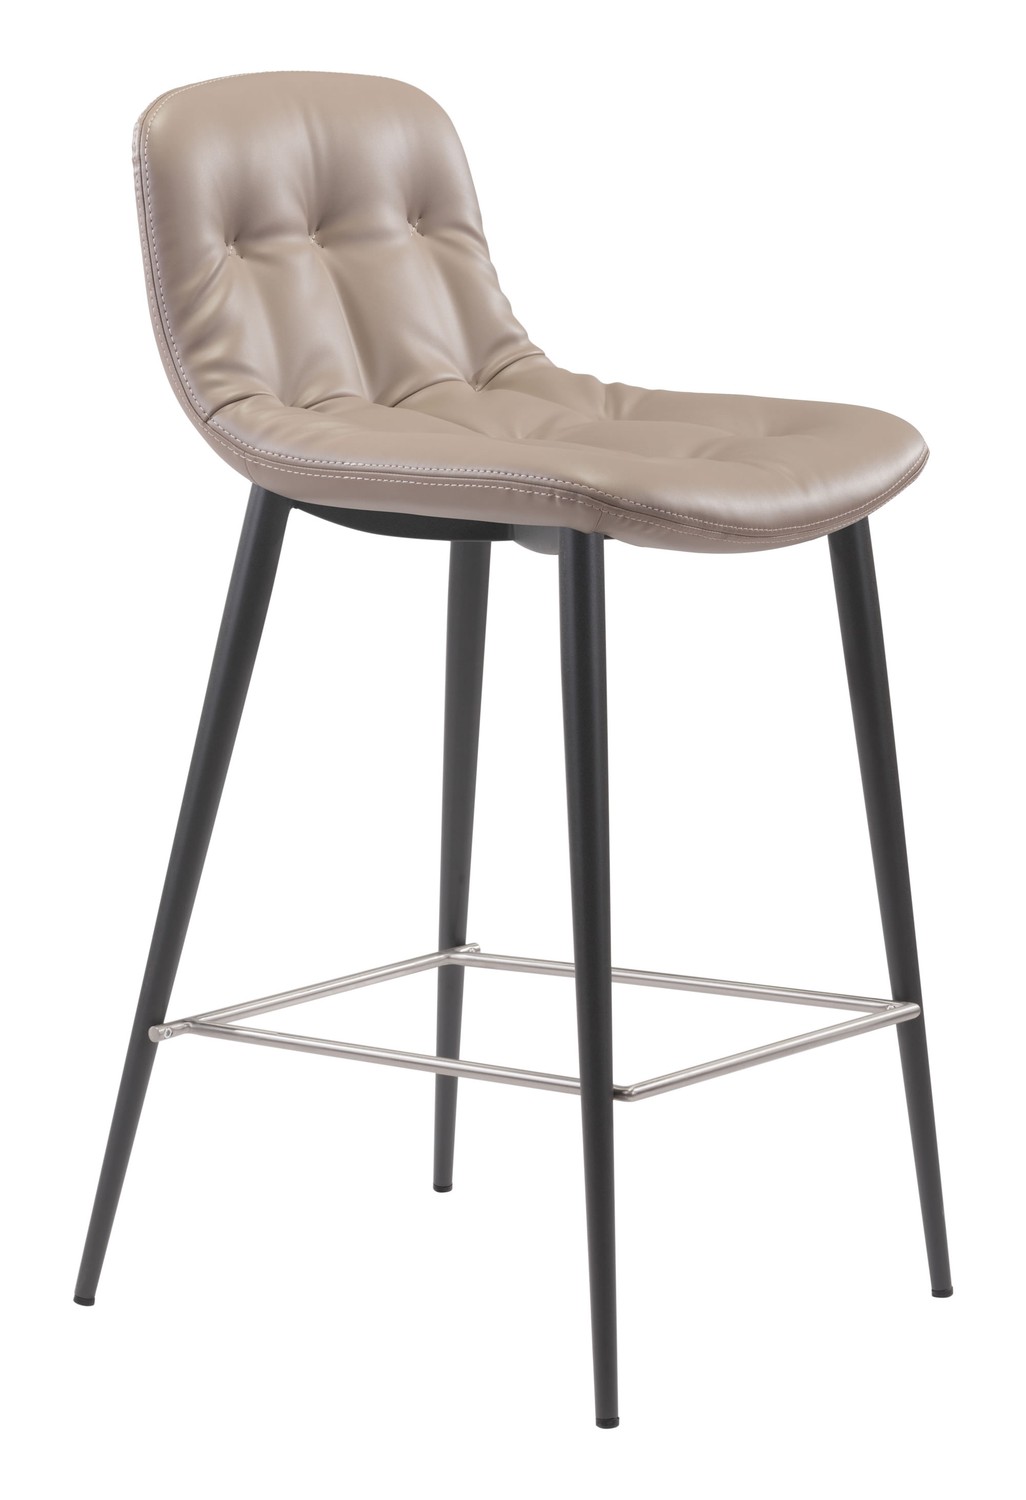 17.3" x 20.7" x 36.2" Taupe, Leatherette, Stainless Steel, Counter Chair - Set of 2